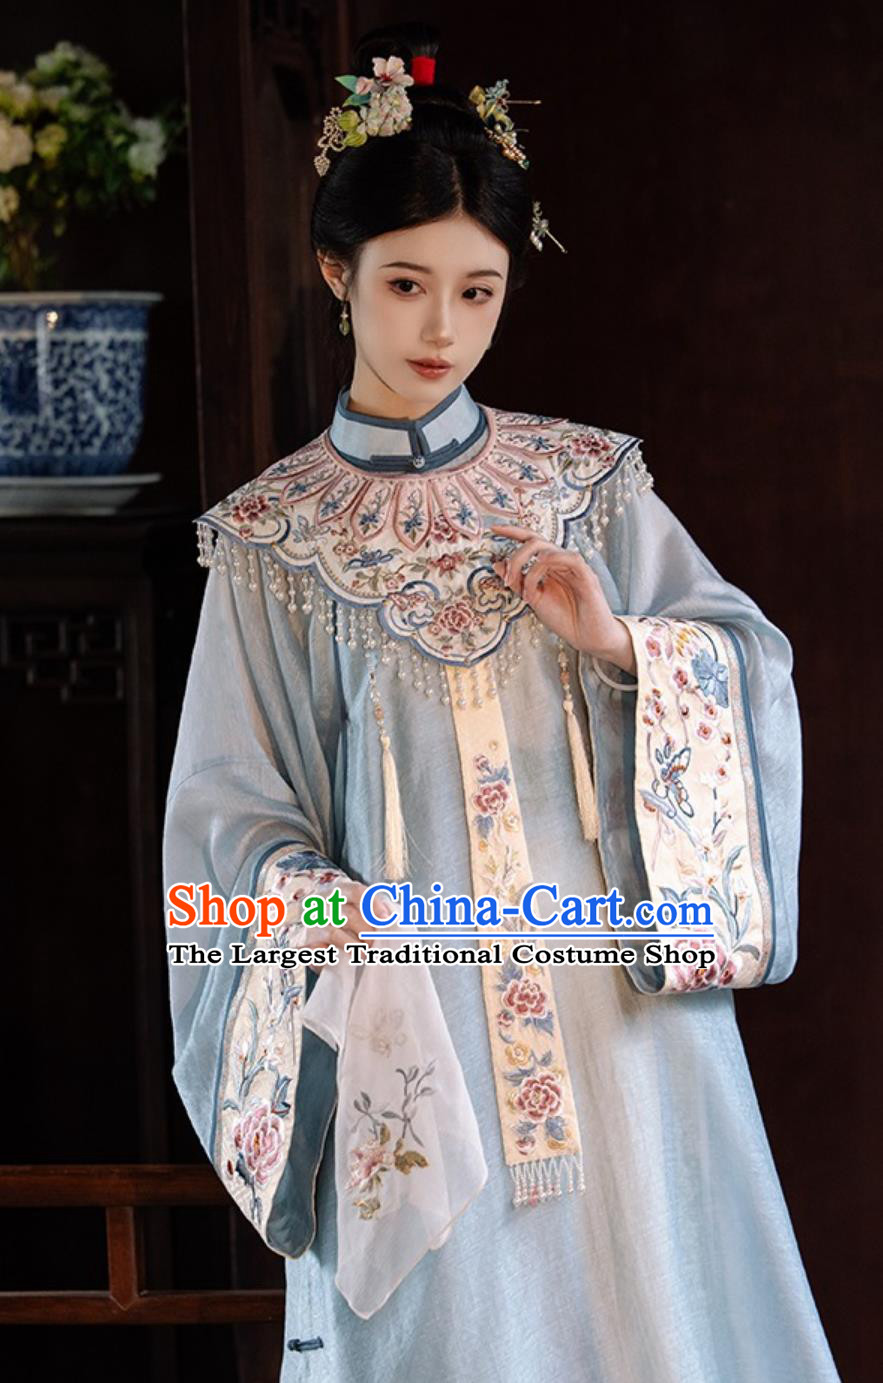 China Qing Dynasty Court Woman Costume Ancient Chinese Clothing Embroidered Yunjian Long Gown and Mamian Skirt Complete Set